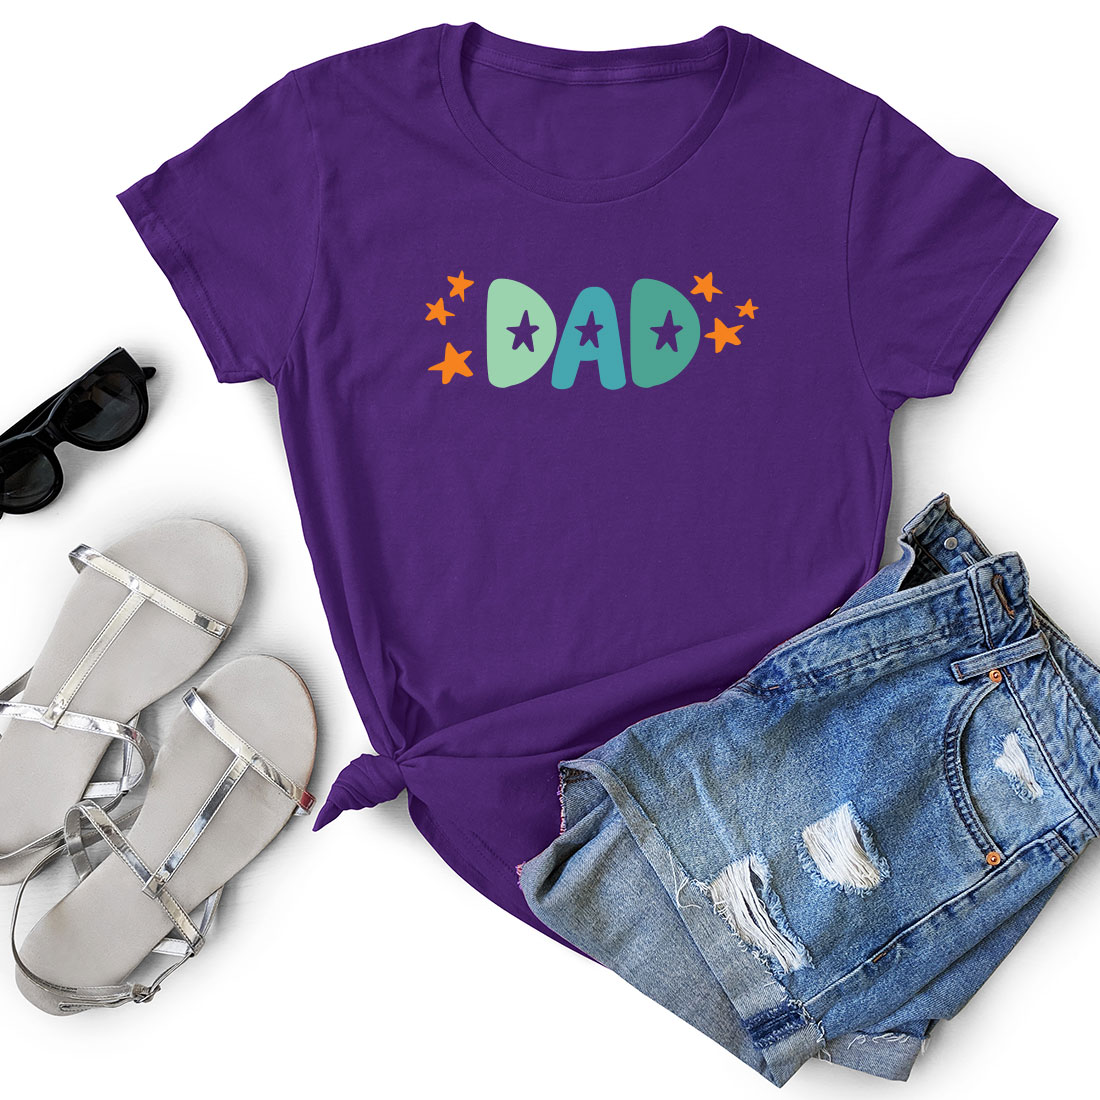 Purple shirt that says dad with stars on it.